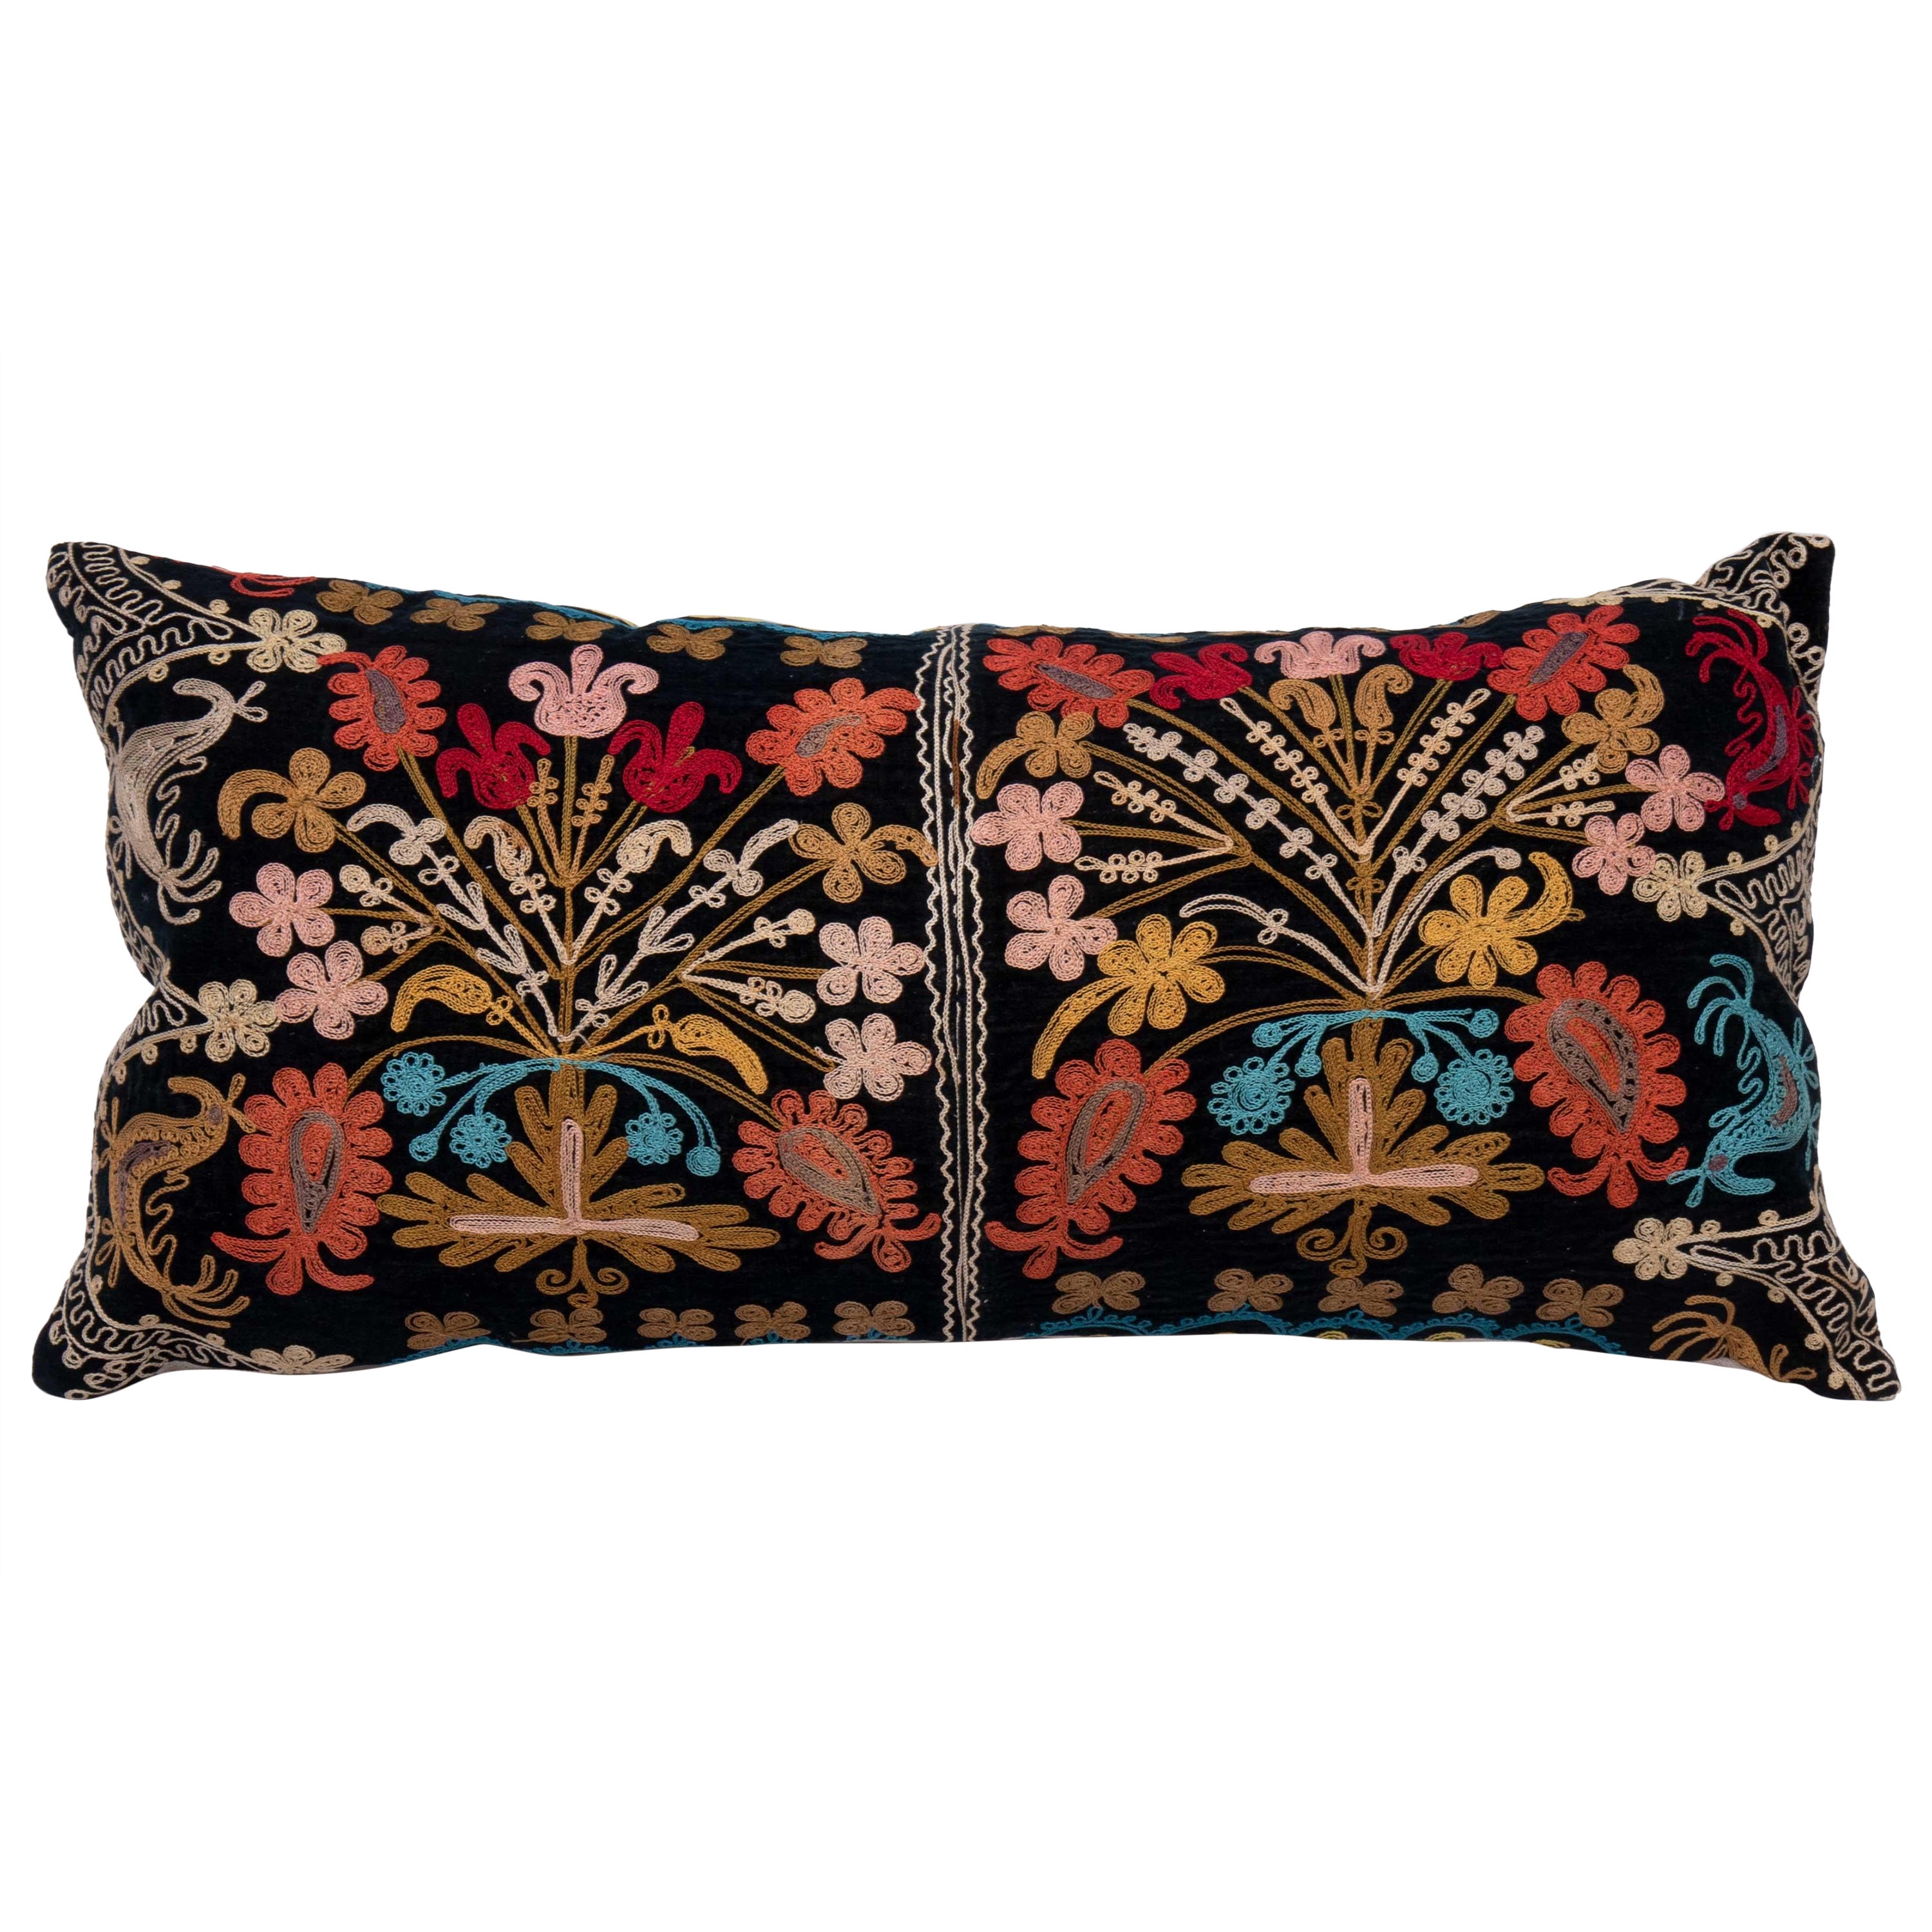 Suzani Pillow Cover Made from a Vintage Velvet Suzani For Sale